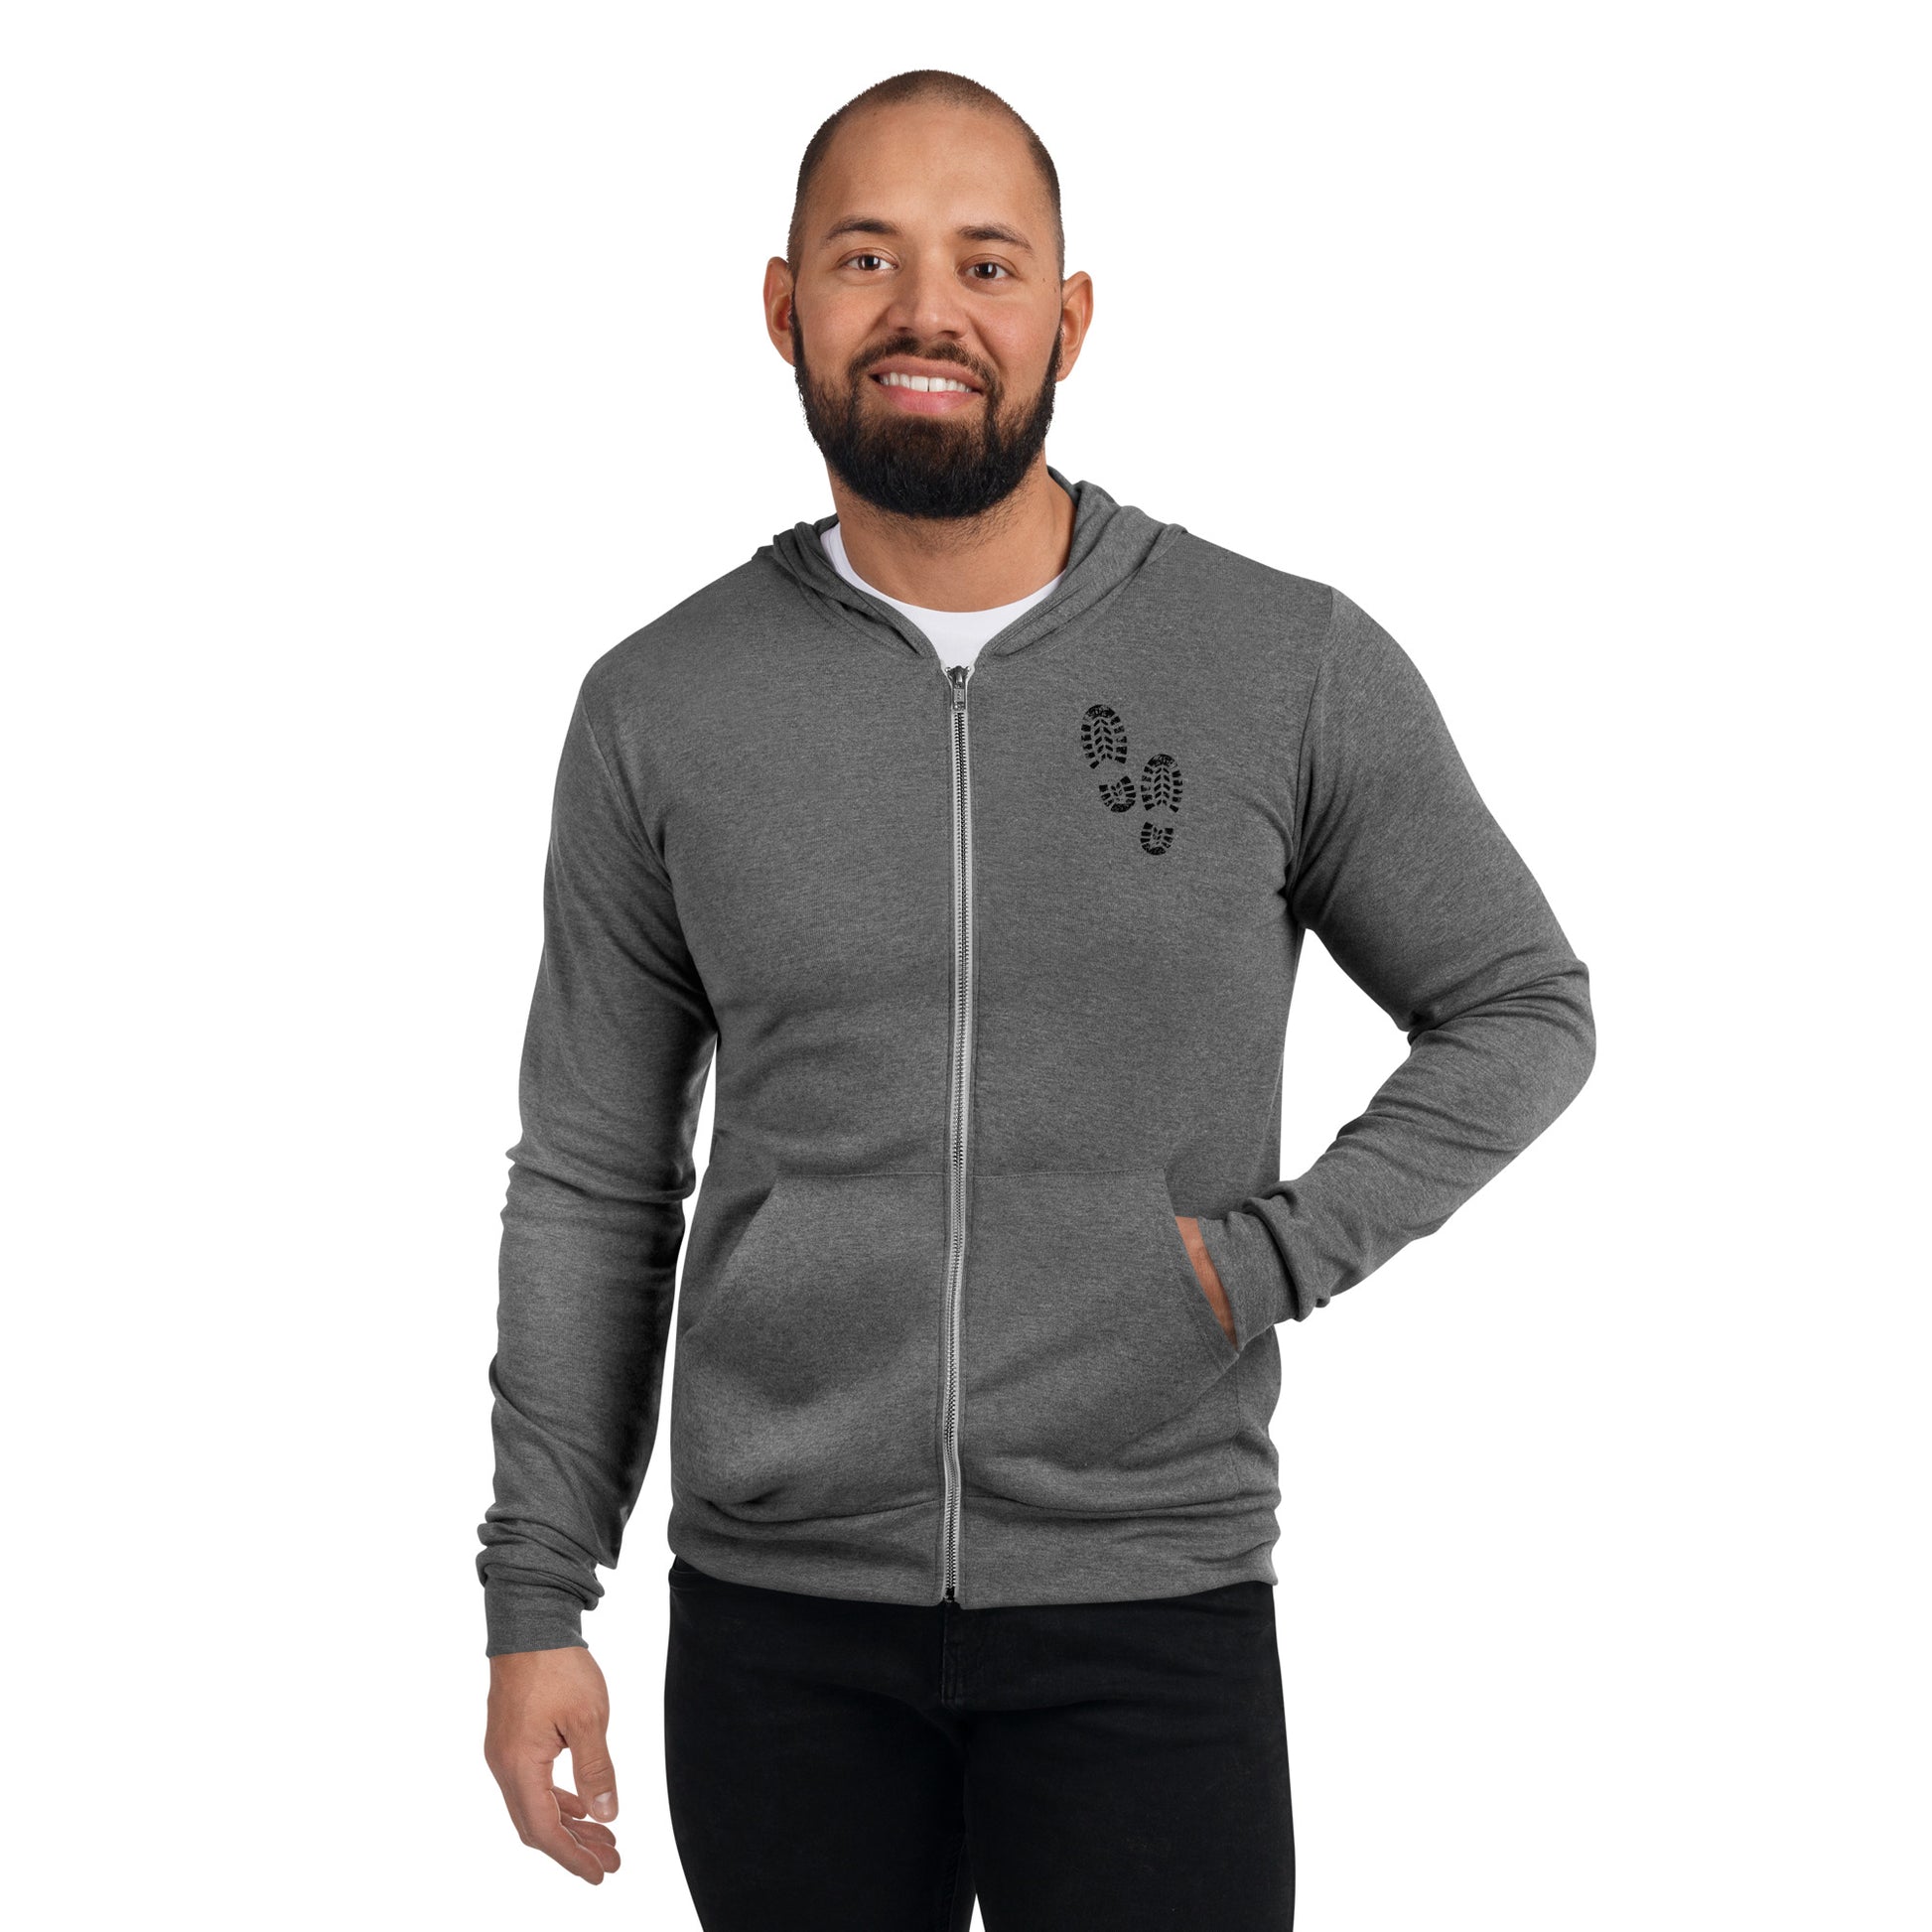 hoodie pocket explore hike hiking unisex bella canvas comfy lightweight mountain trail 